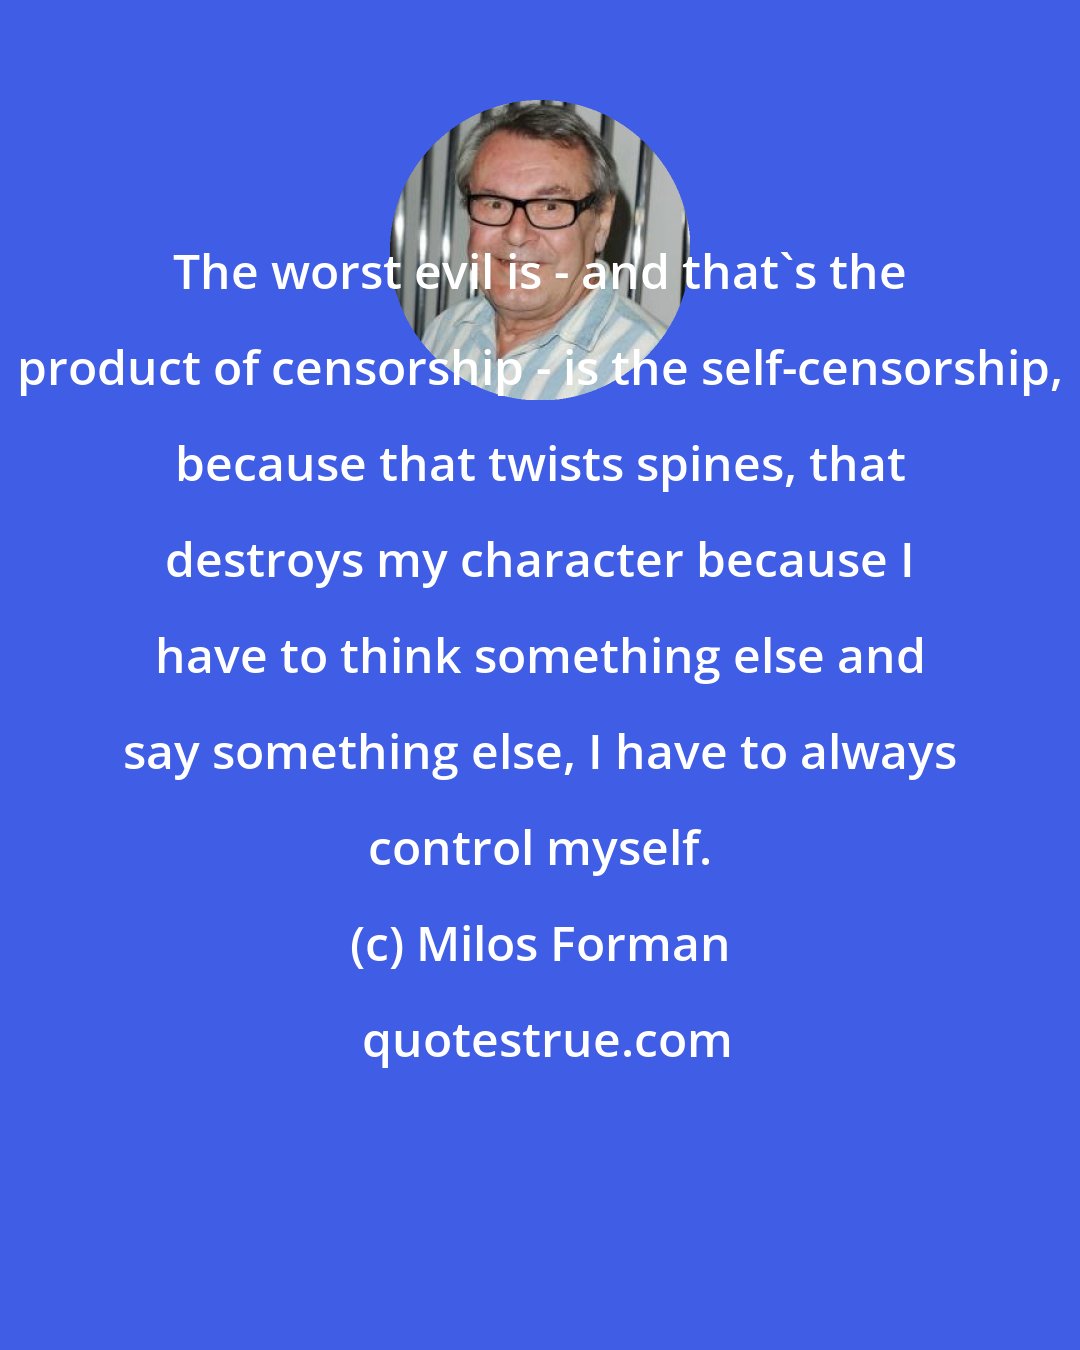 Milos Forman: The worst evil is - and that's the product of censorship - is the self-censorship, because that twists spines, that destroys my character because I have to think something else and say something else, I have to always control myself.